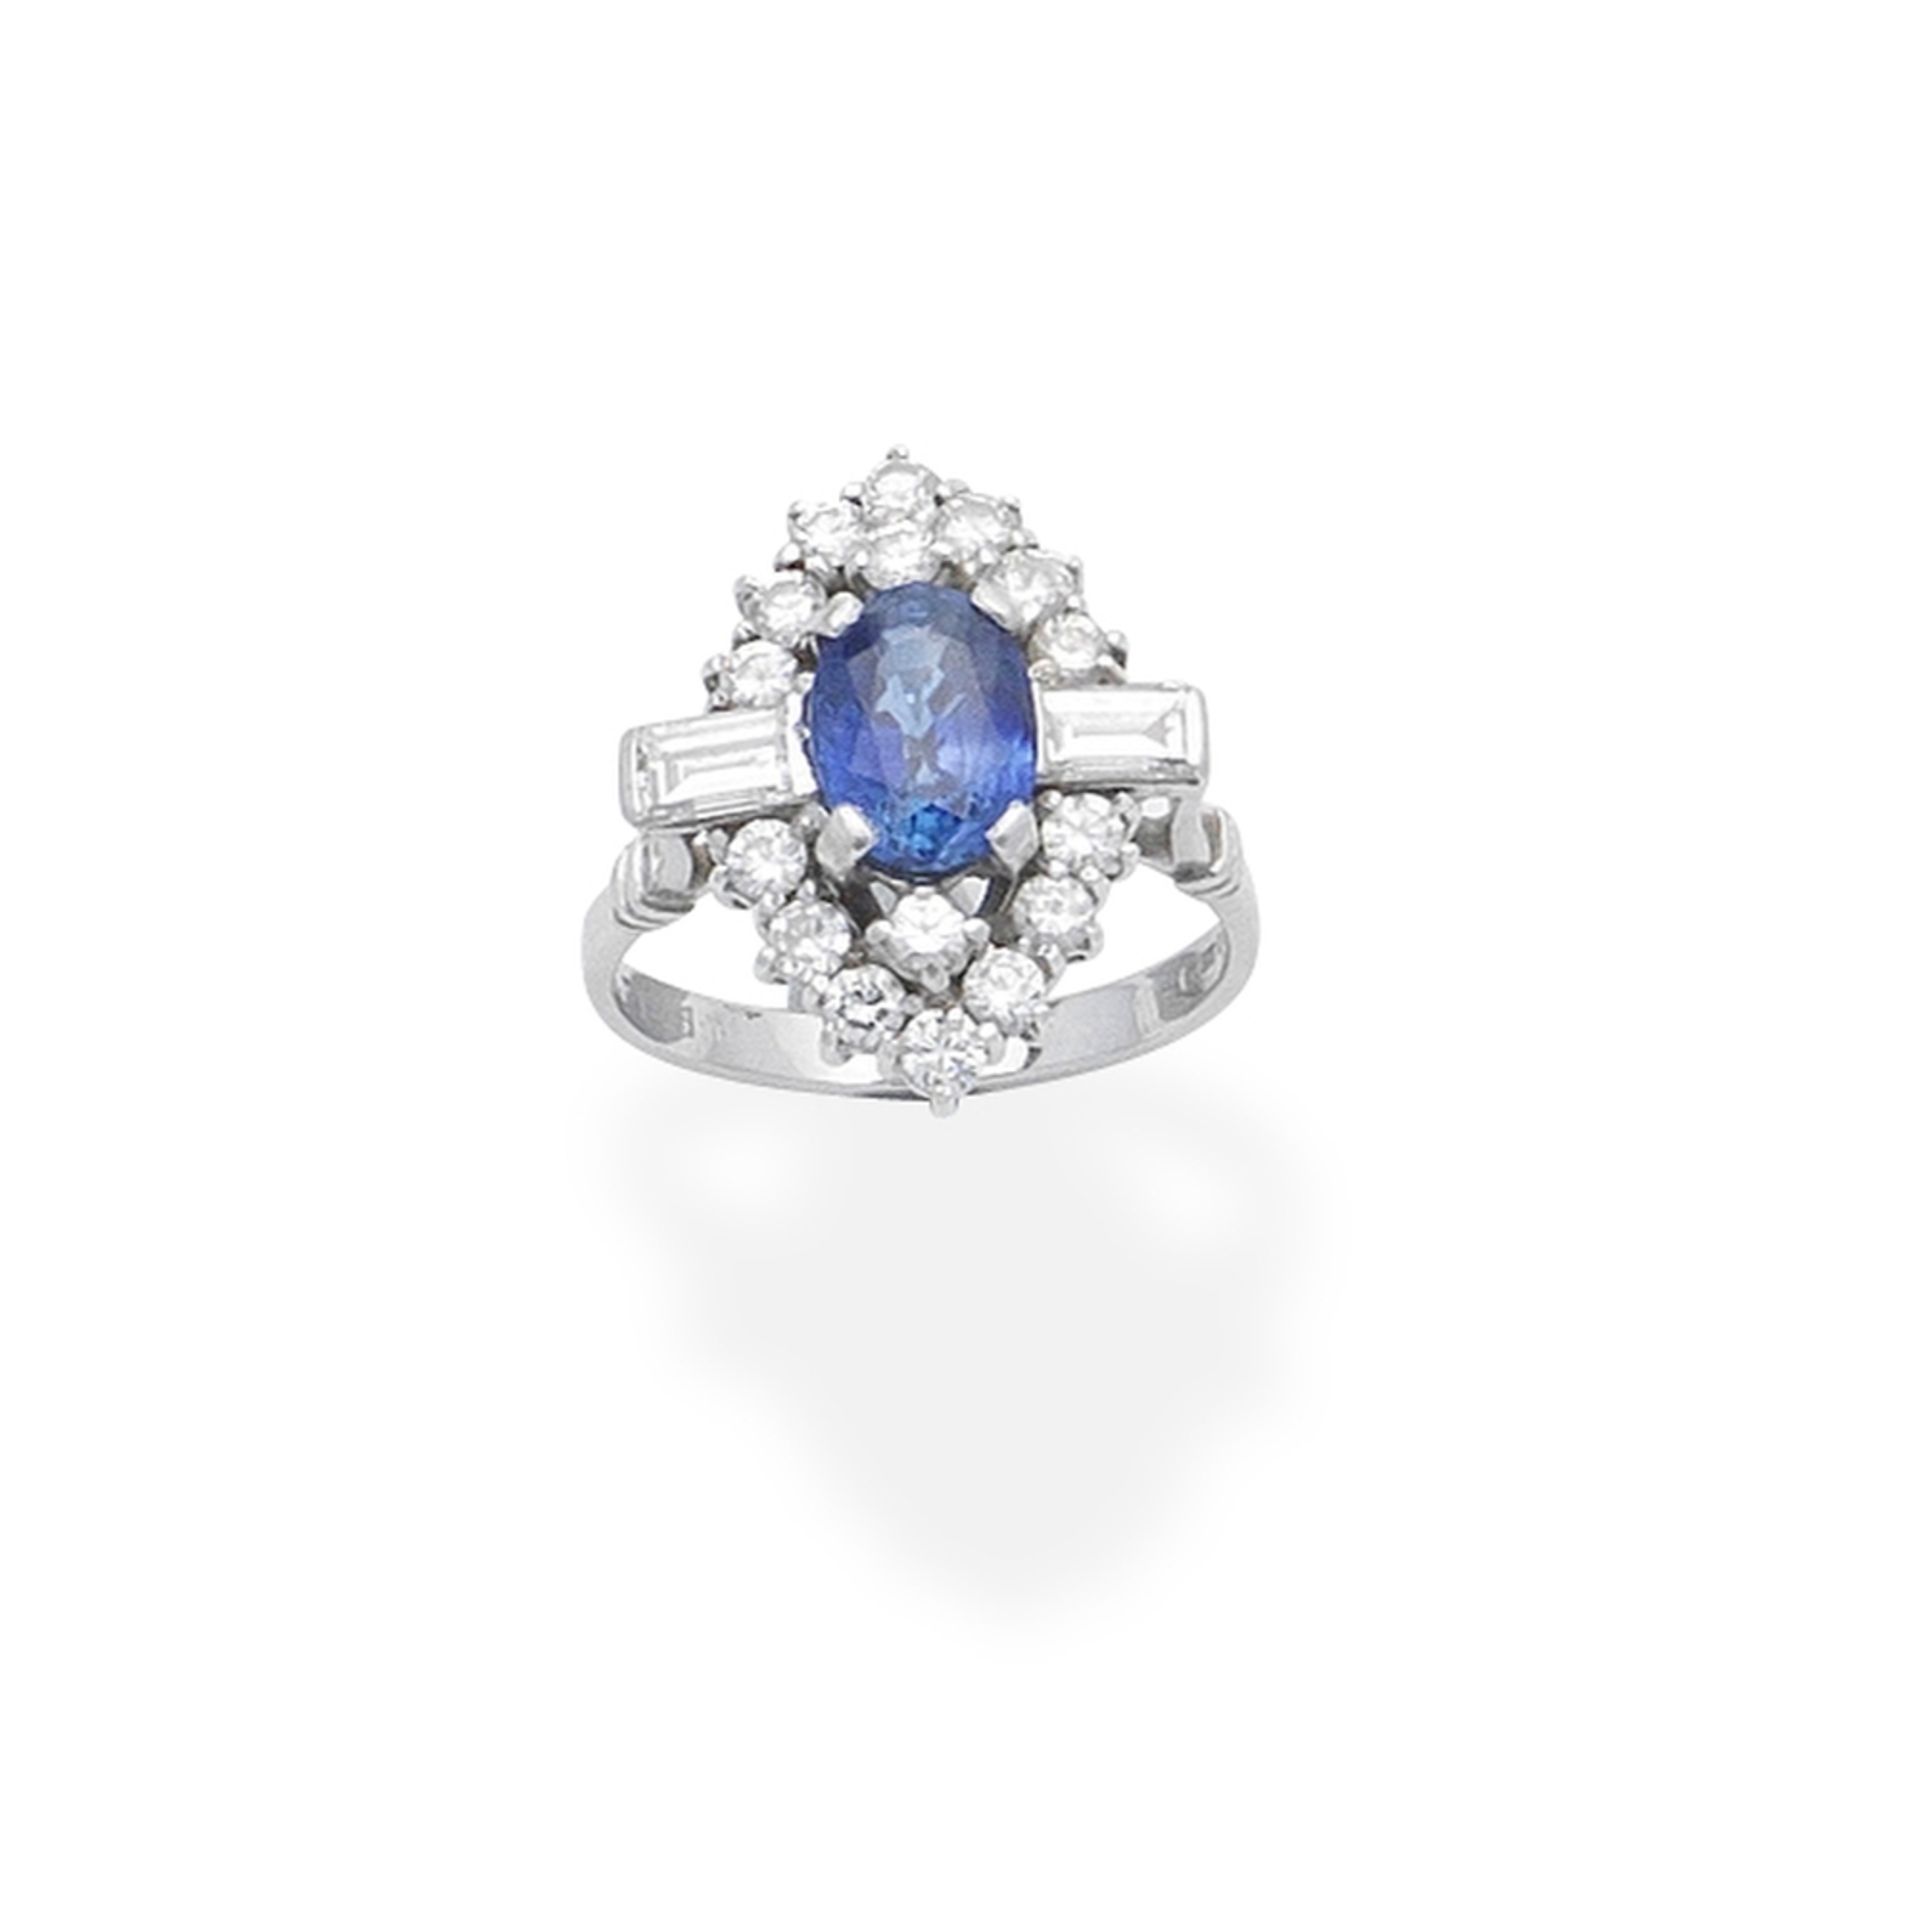 Sapphire and diamond cluster ring, 1975